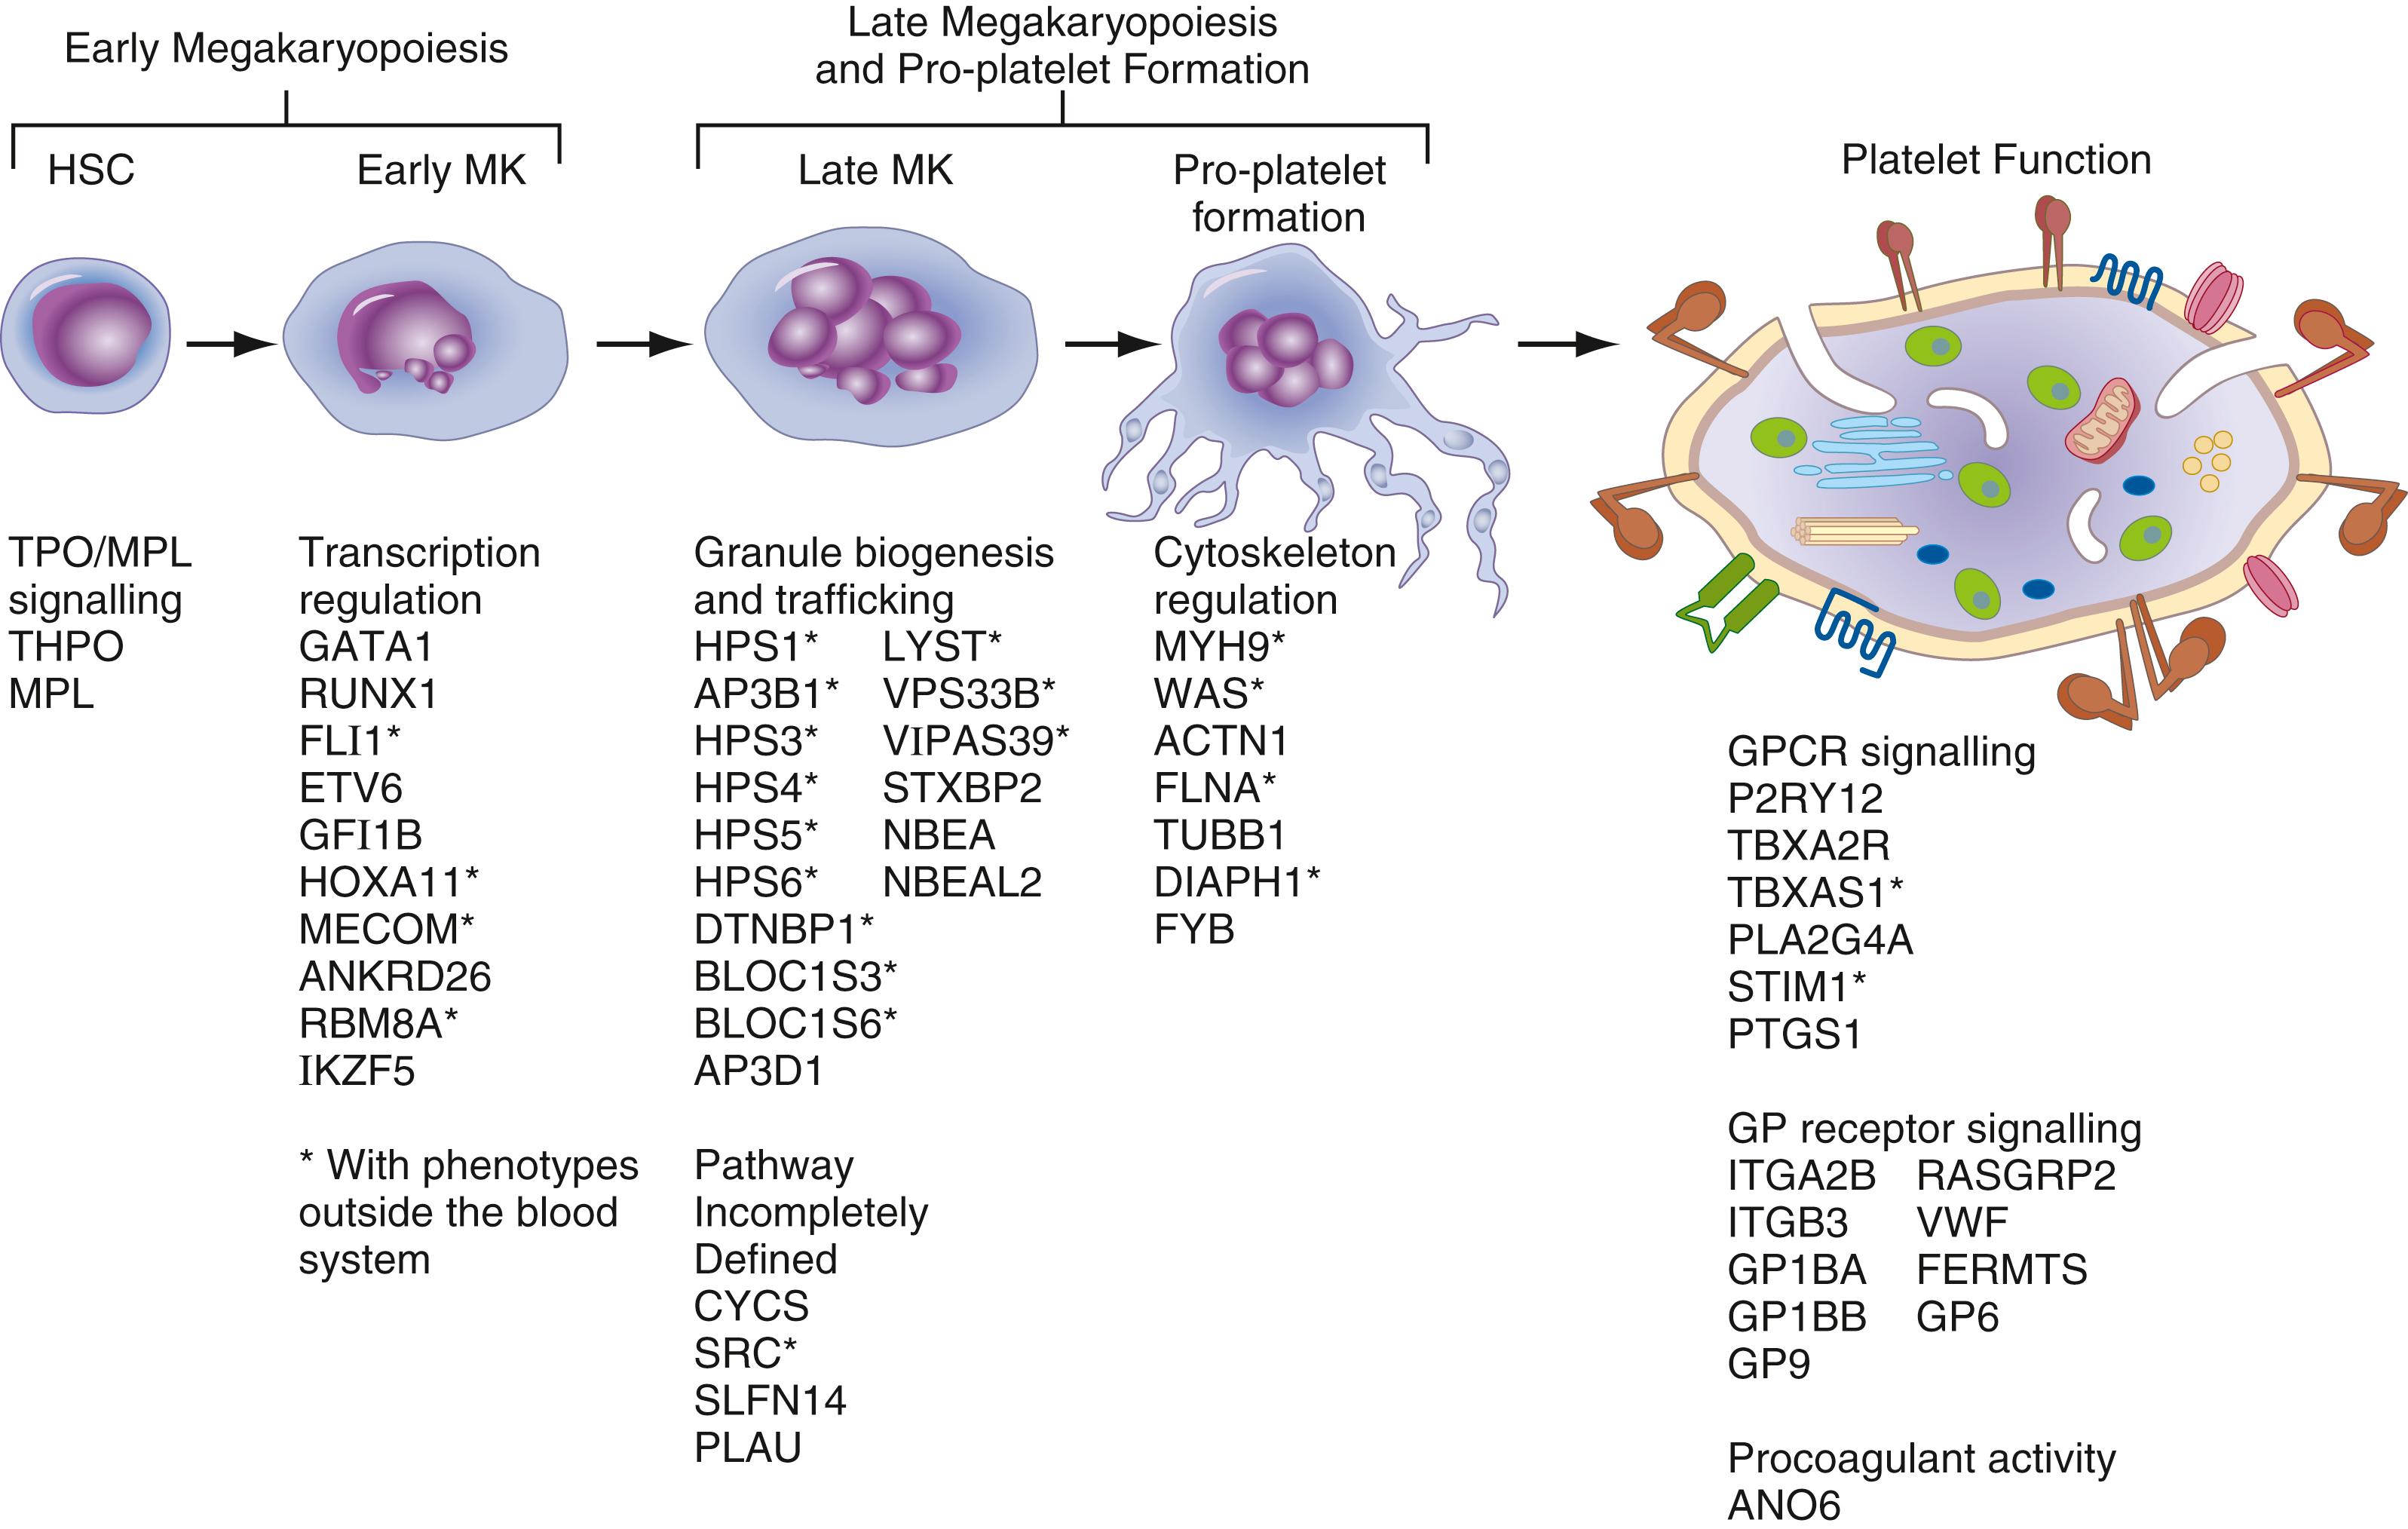 Figure 41.5, Genes underlying inherited disorders of platelet number and function. The figure shows the processes of megakaryopoiesis and platelet formation, selected aspects of platelet function, and the genes underlying the inherited platelet disorders. Each of the genes shown are categorized according to their effect on megakaryocytes and platelet biology. Those shown with asterisks are typically associated with phenotypes outside the blood system. HSC, Hematopoietic stem cell.